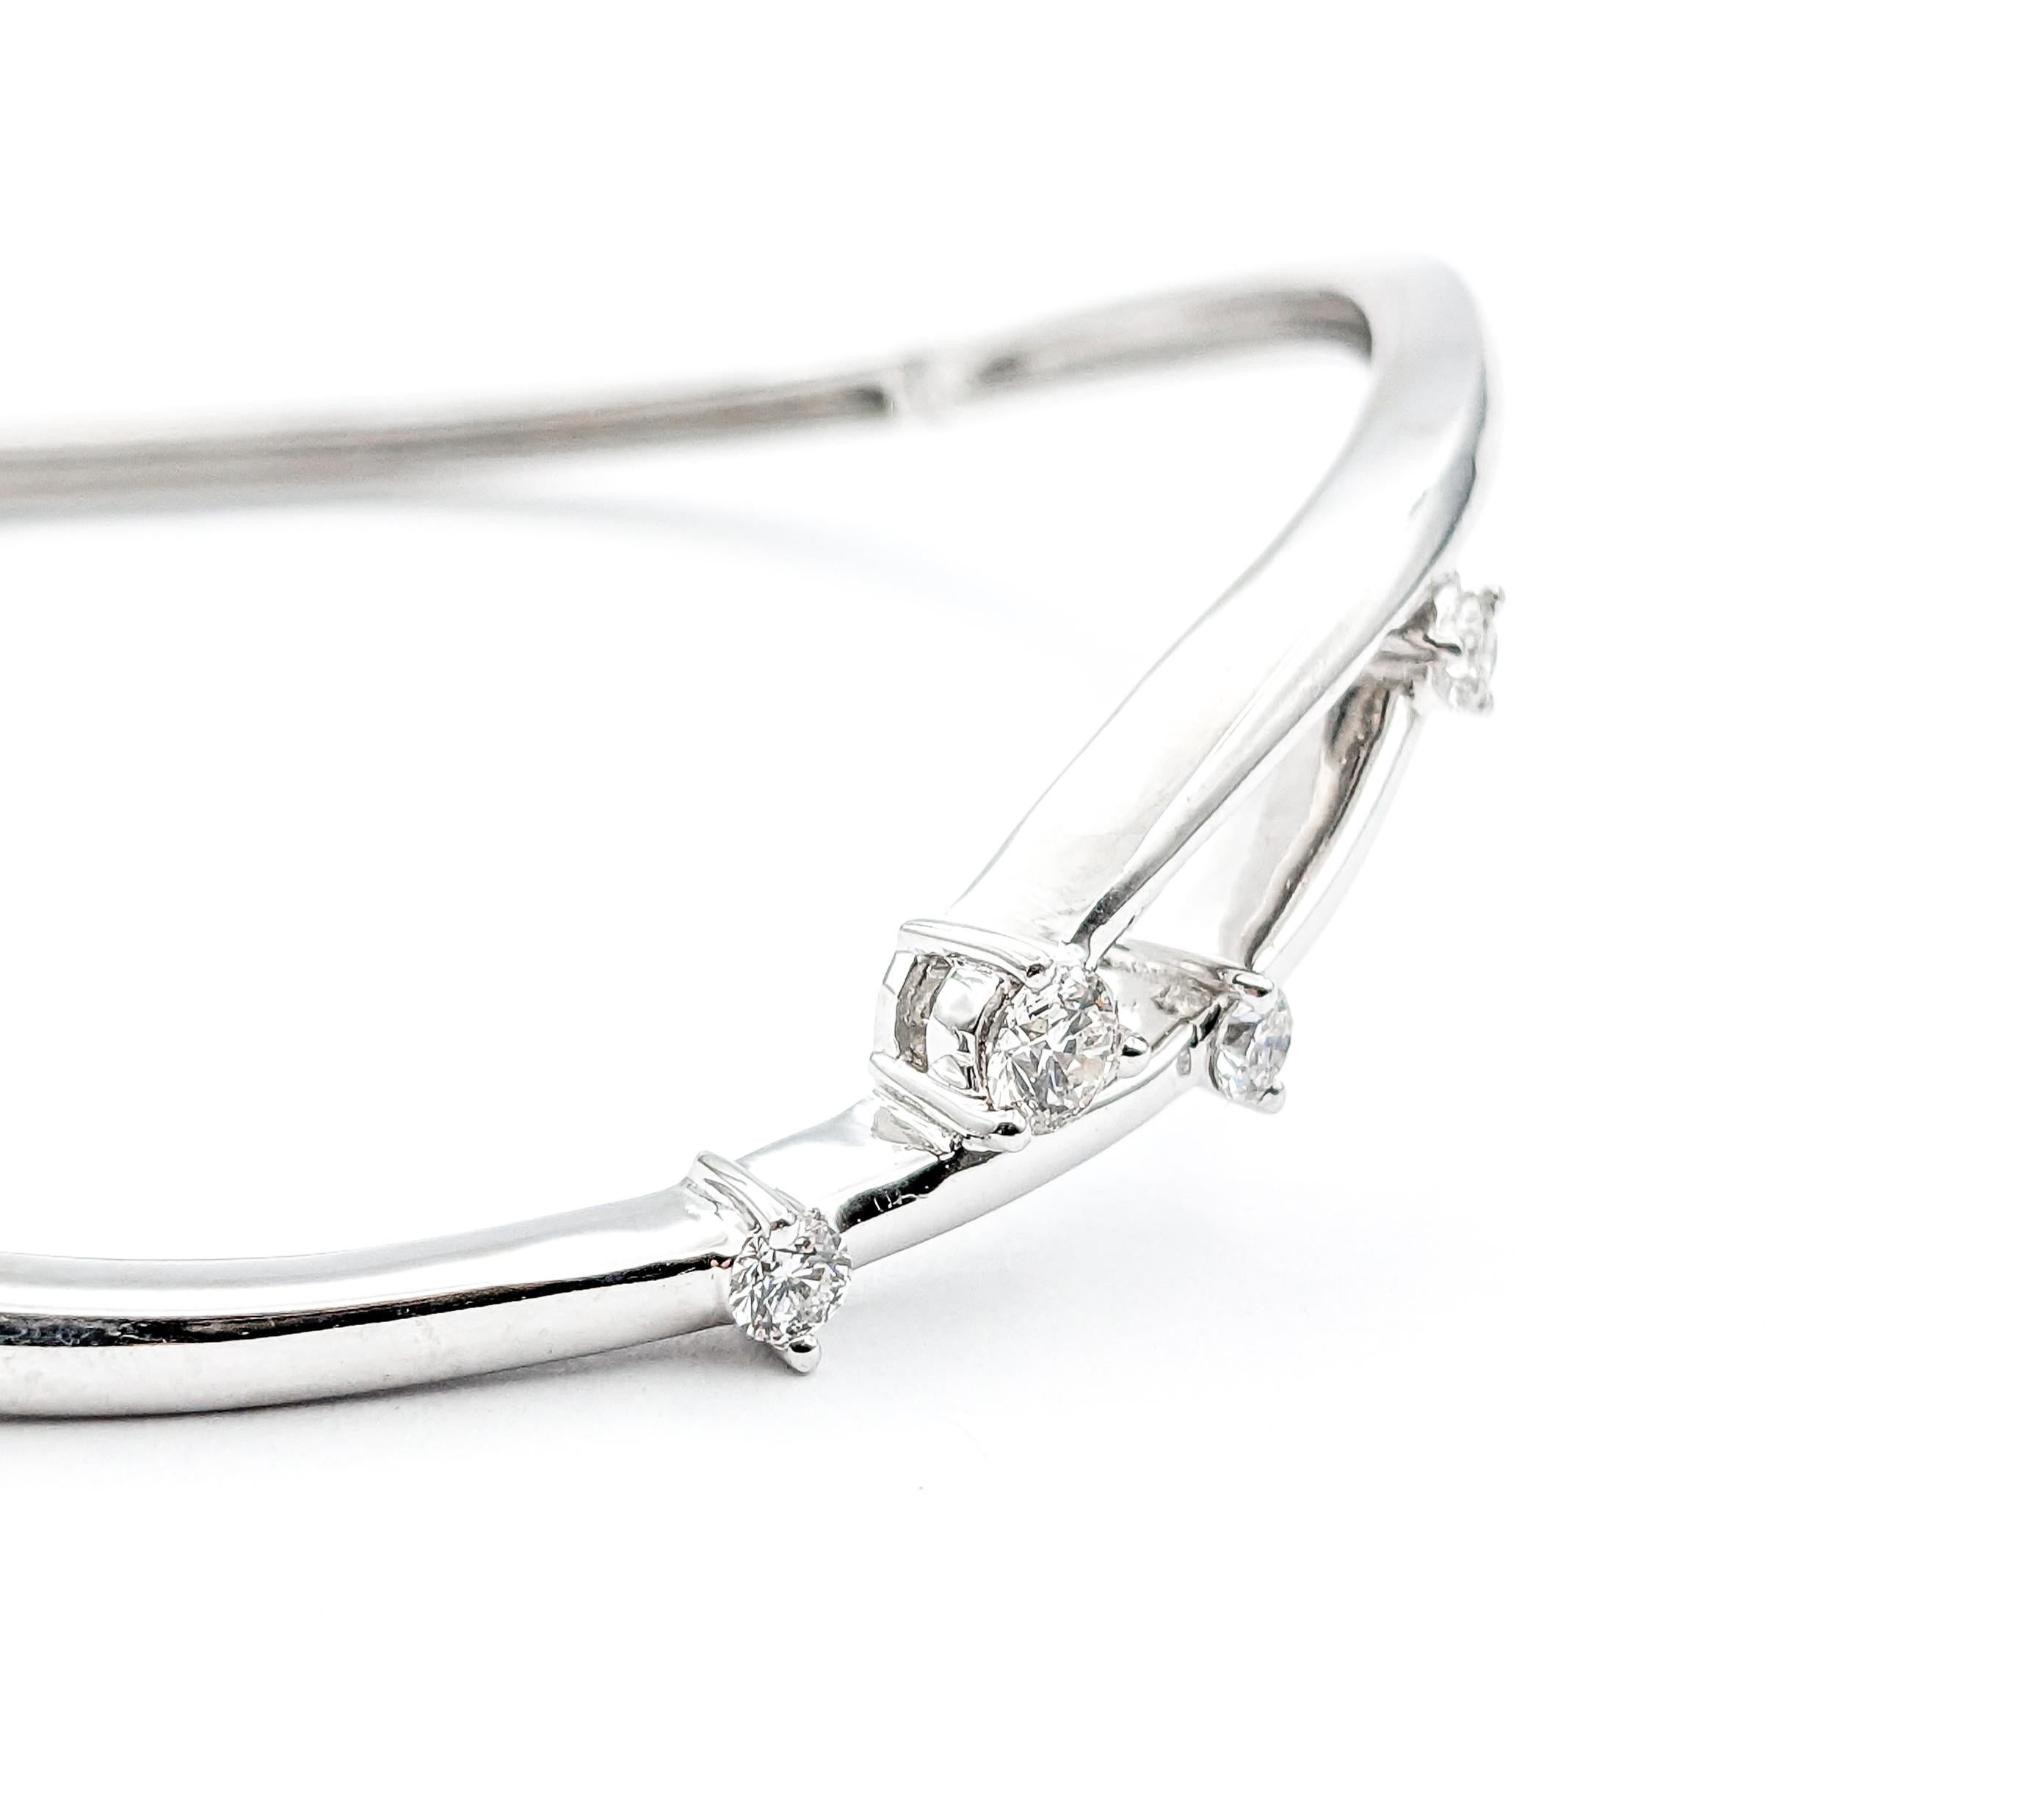 Diamond Hinged Bangle Bracelet In White Gold


Introducing a stunning Hinged Bracelet Bangle, elegantly crafted in 14k white gold. This exquisite bracelet is adorned with .25ctw of diamonds that shimmer with an I clarity and Near Colorless White